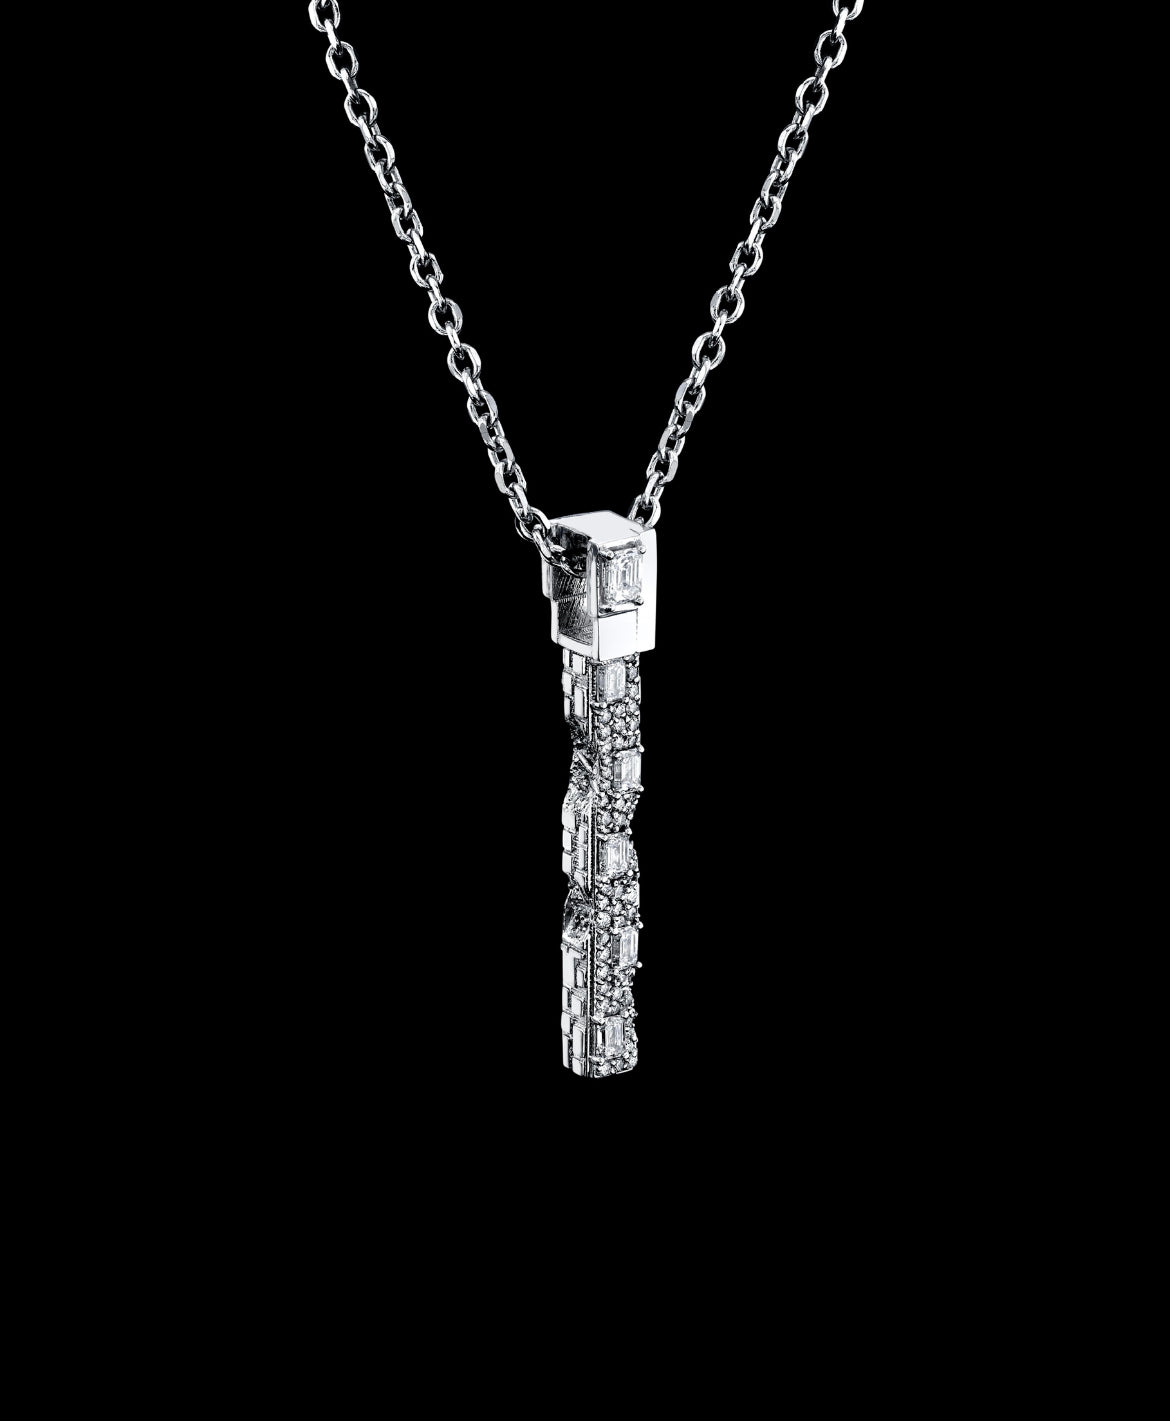 Eroded Architecture 18k White Gold Large Bar Necklace with 10 point emerald cut + round brilliant pave set diamonds.  Edition of 10.